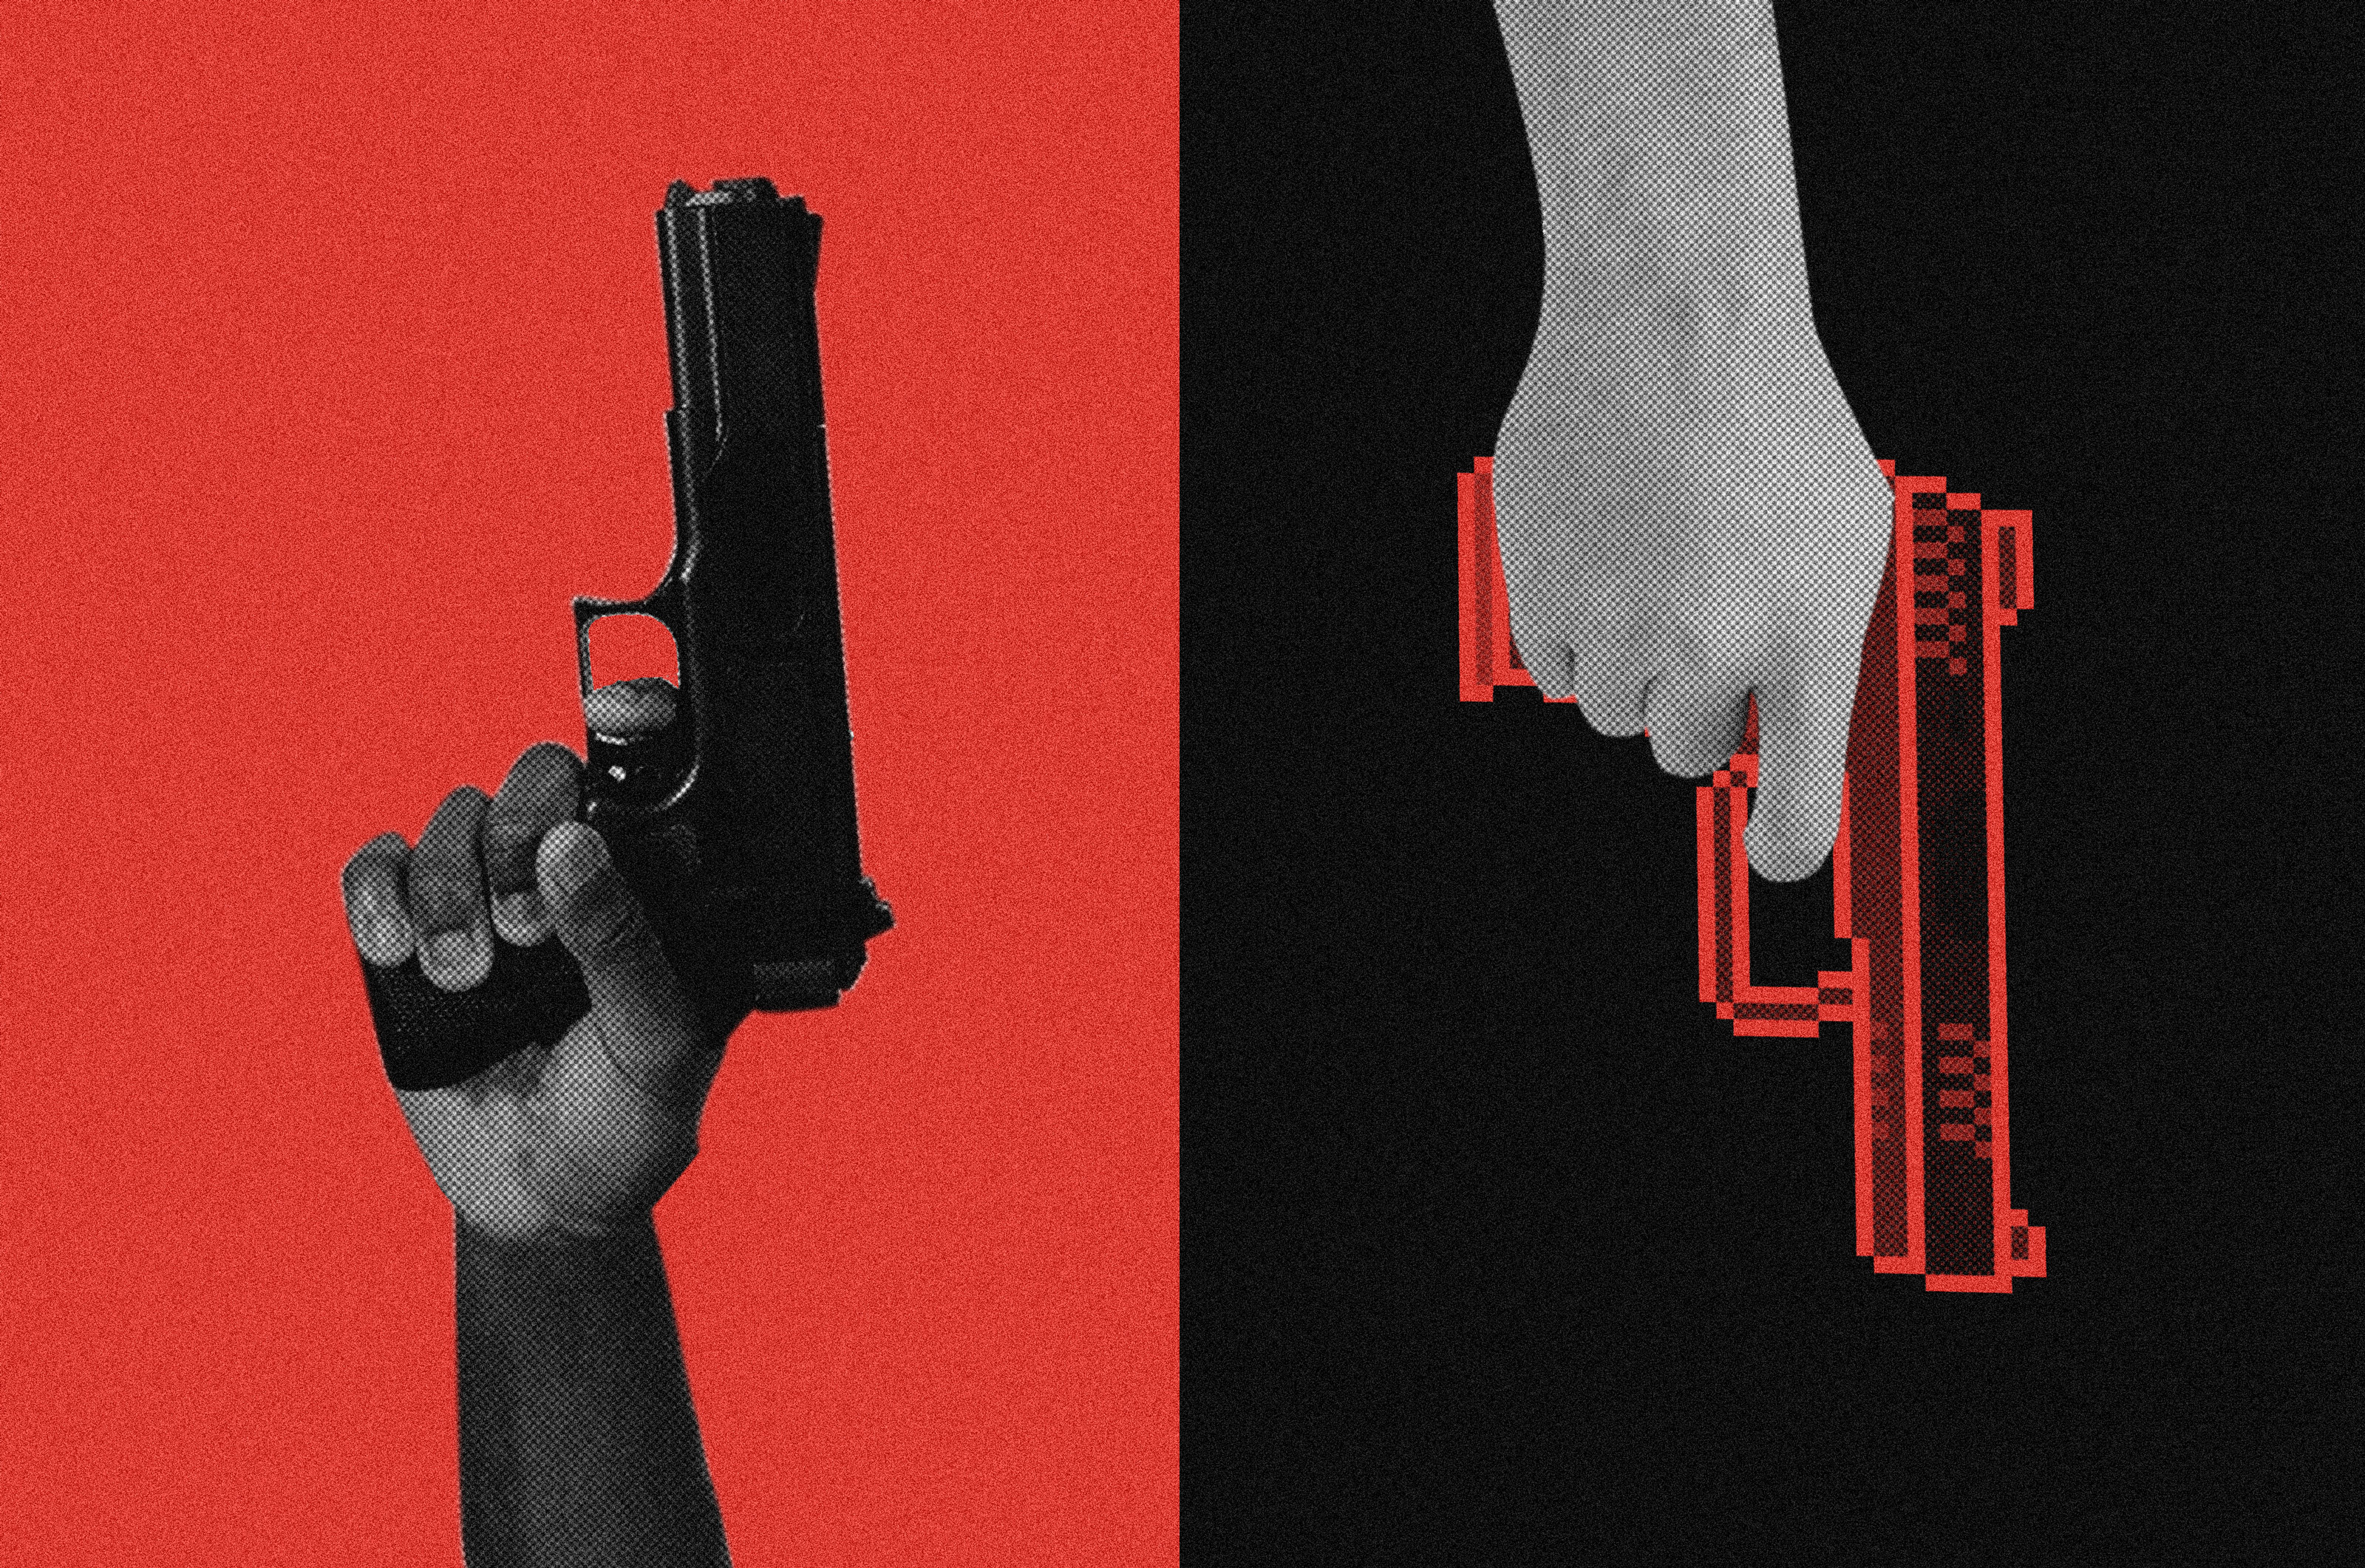 Conceptual photo illustration showing black person&#039;s hand holding a gun and a white hand holding a video-game-style gun